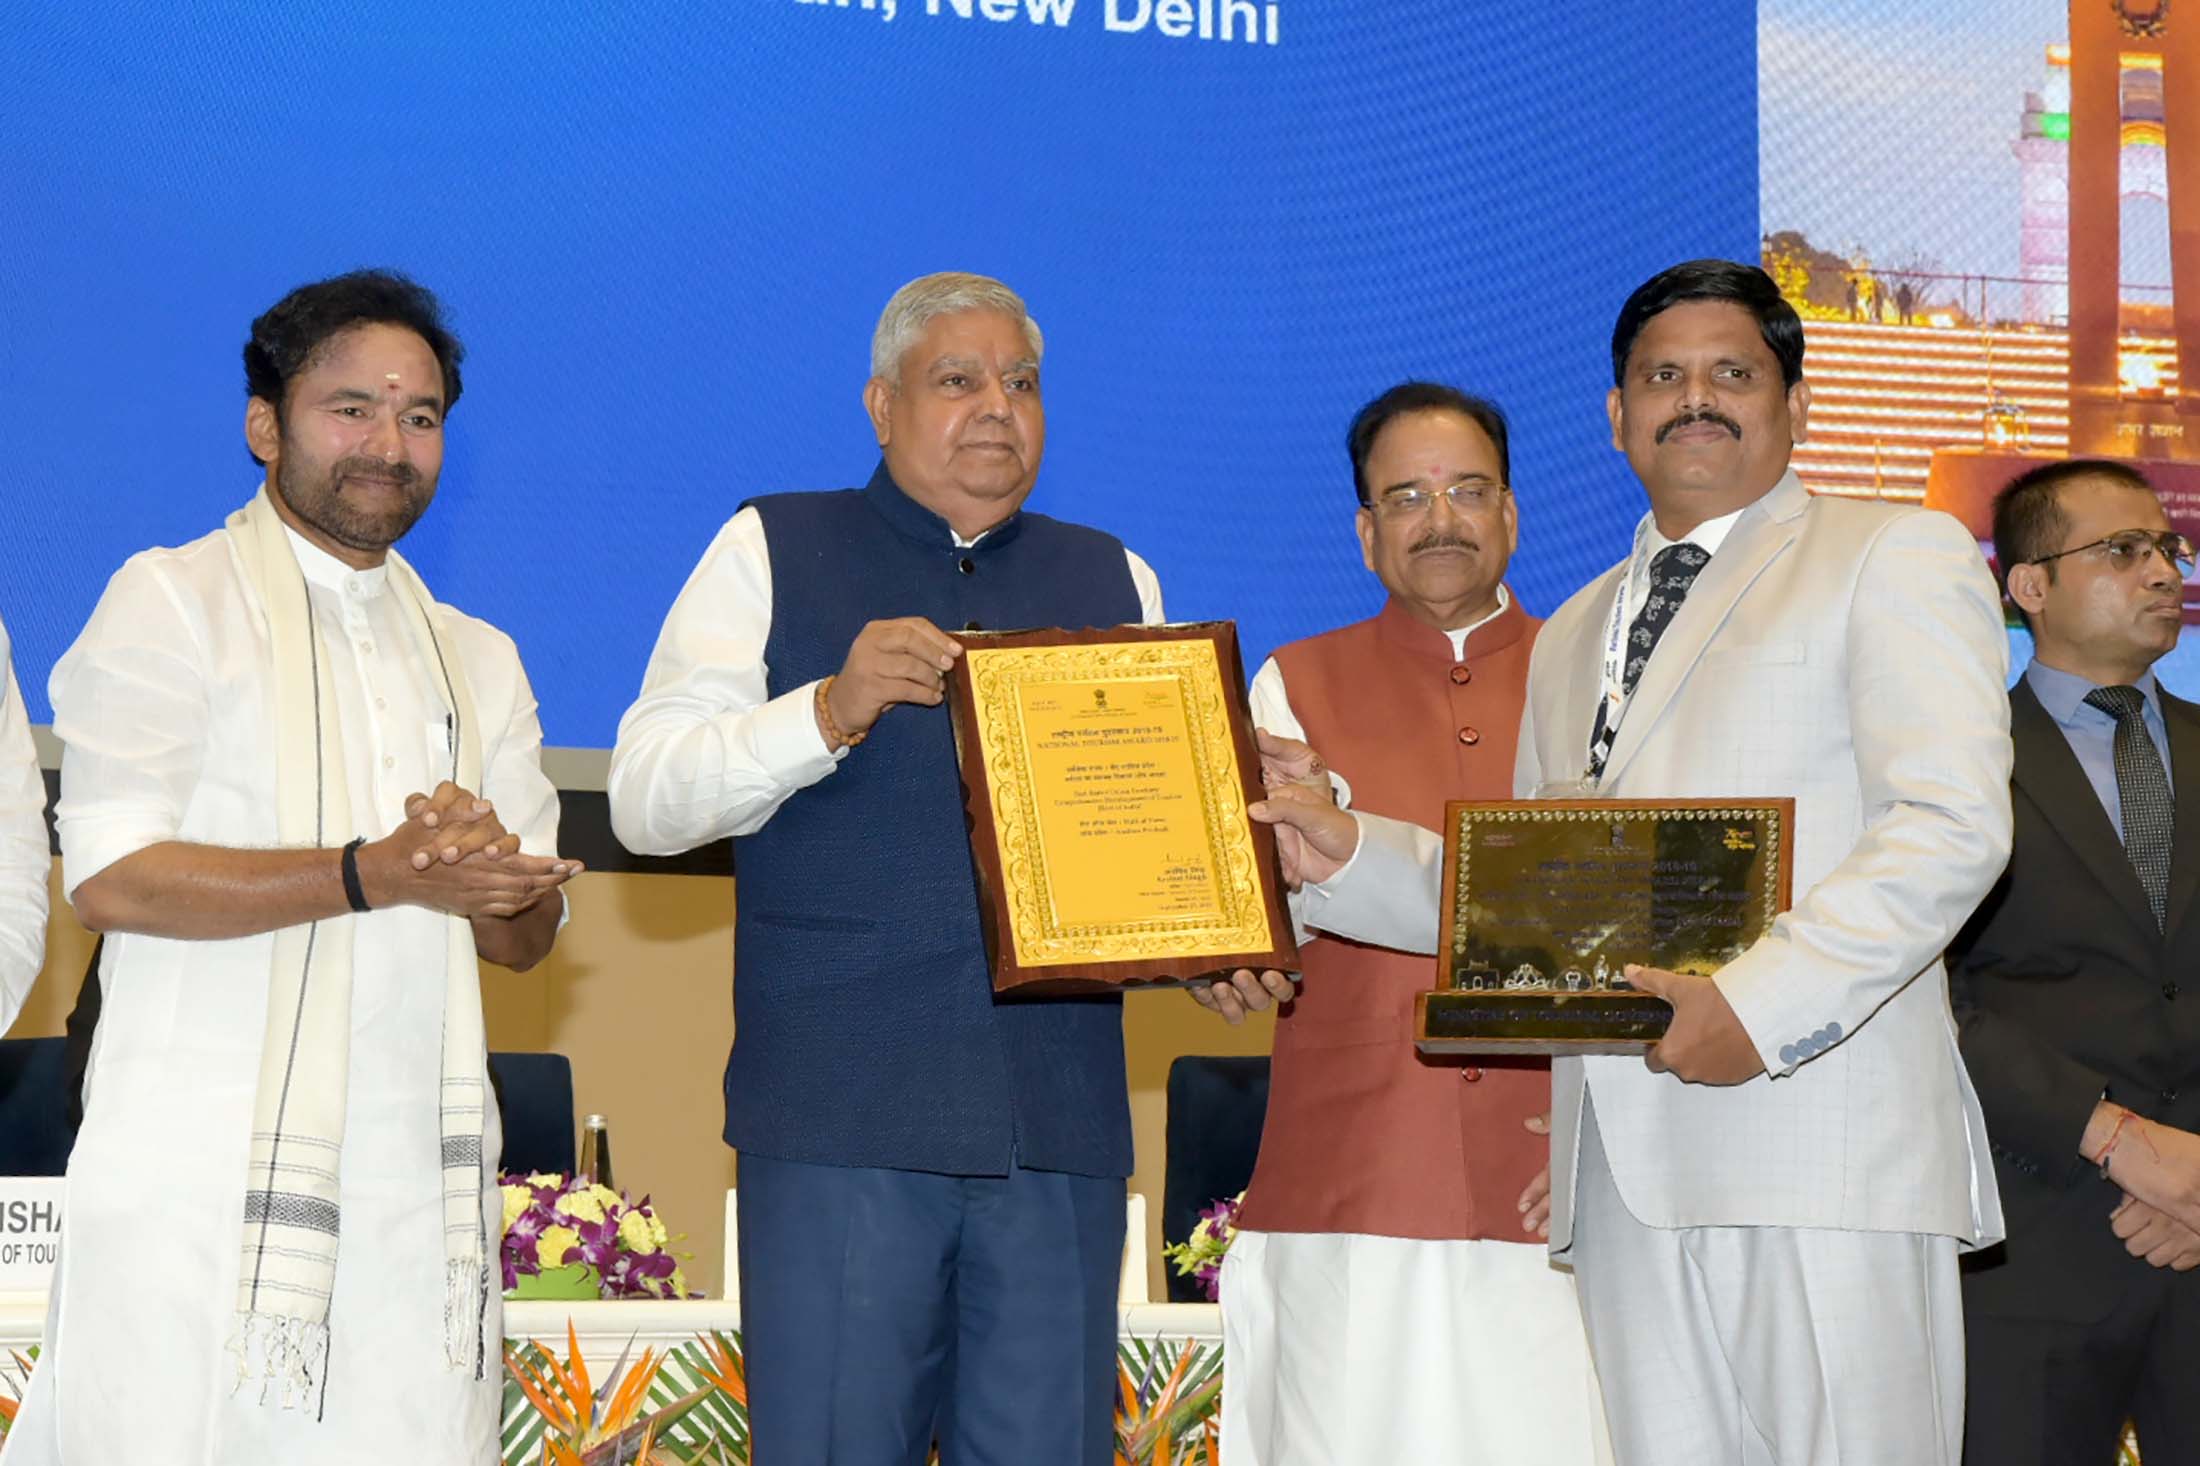 The Vice President, Shri Jagdeep Dhankhar at the National Tourism Awards (2018-19) ceremony at Vigyan Bhawan in New Delhi on September 27, 2022.